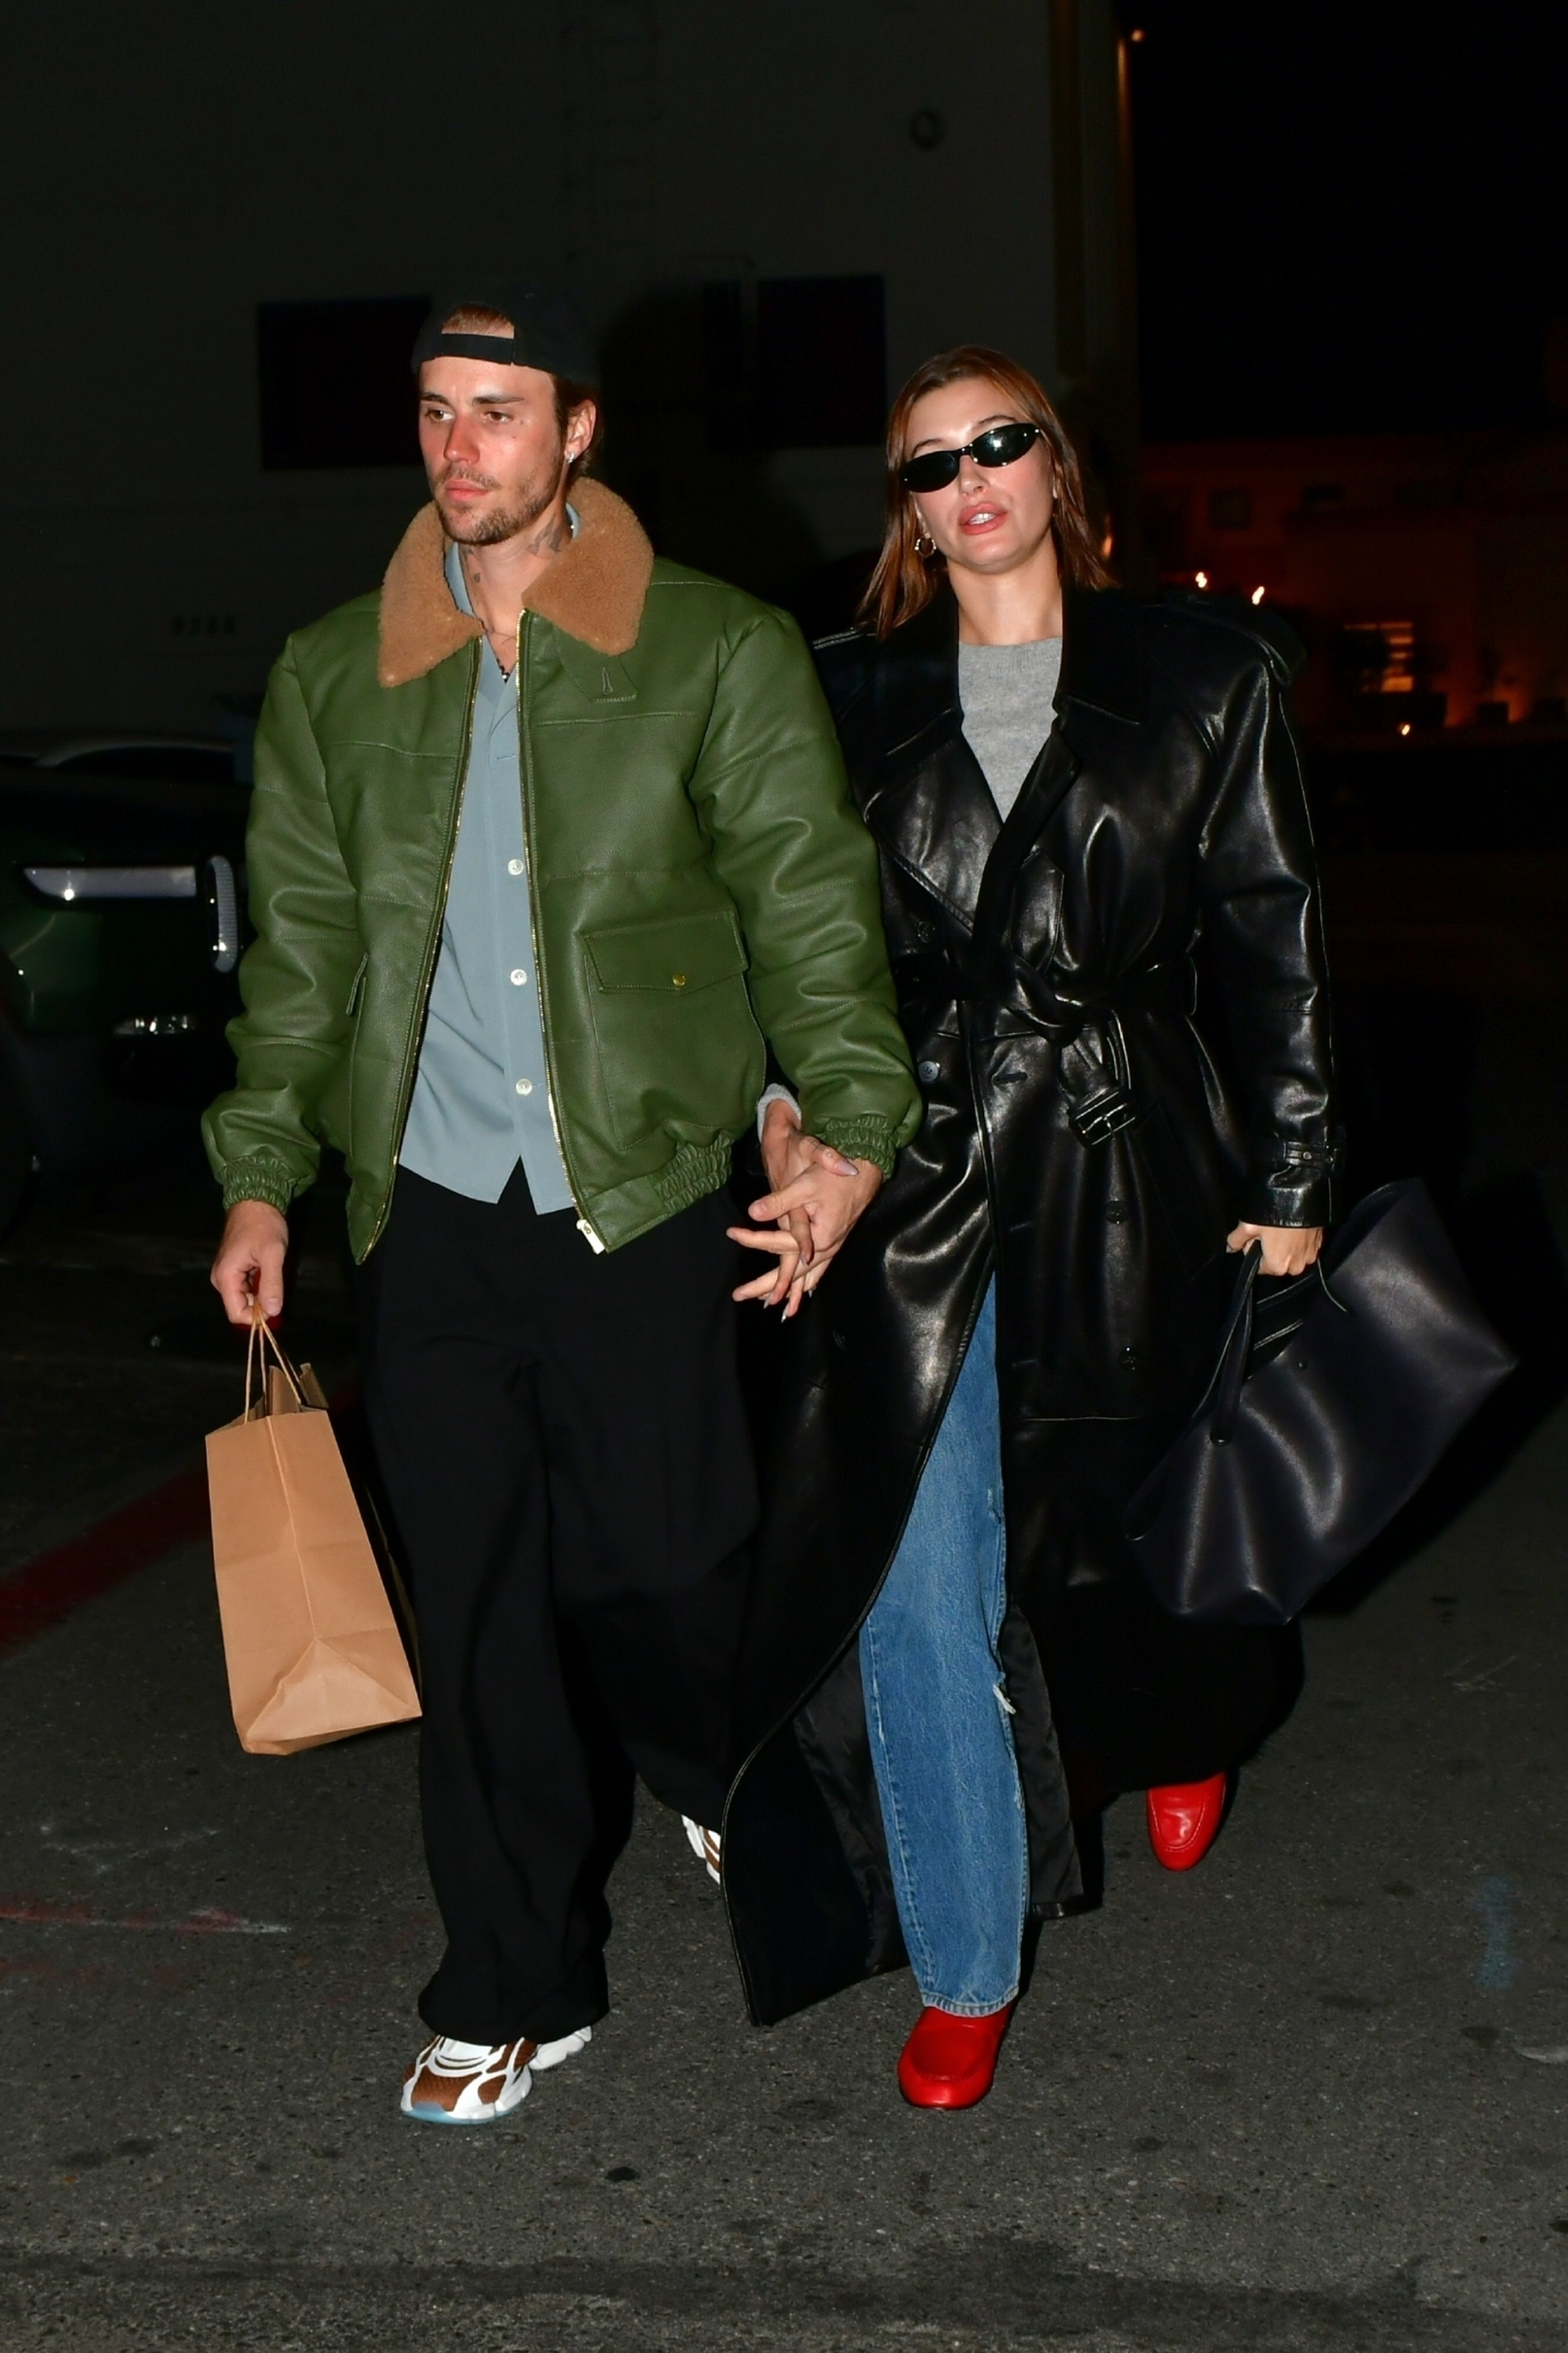 The couple were seen holding hands as they left the Italian restaurant Funke in Beverly Hills, California